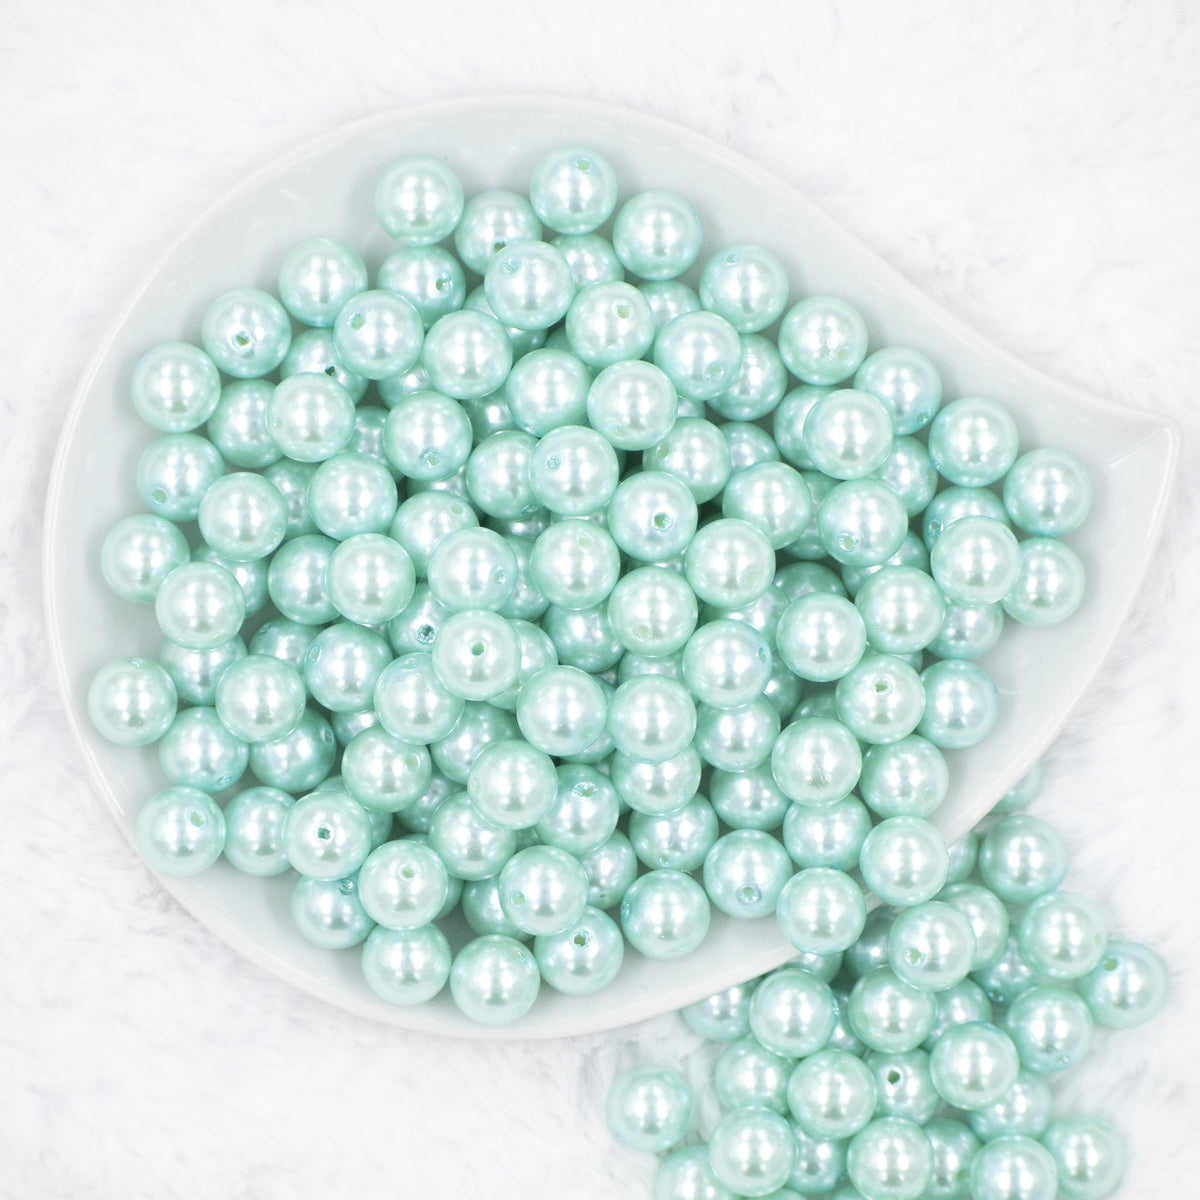 12mm Spring Green Clear AB Finish Miracle Acrylic Bubblegum Beads